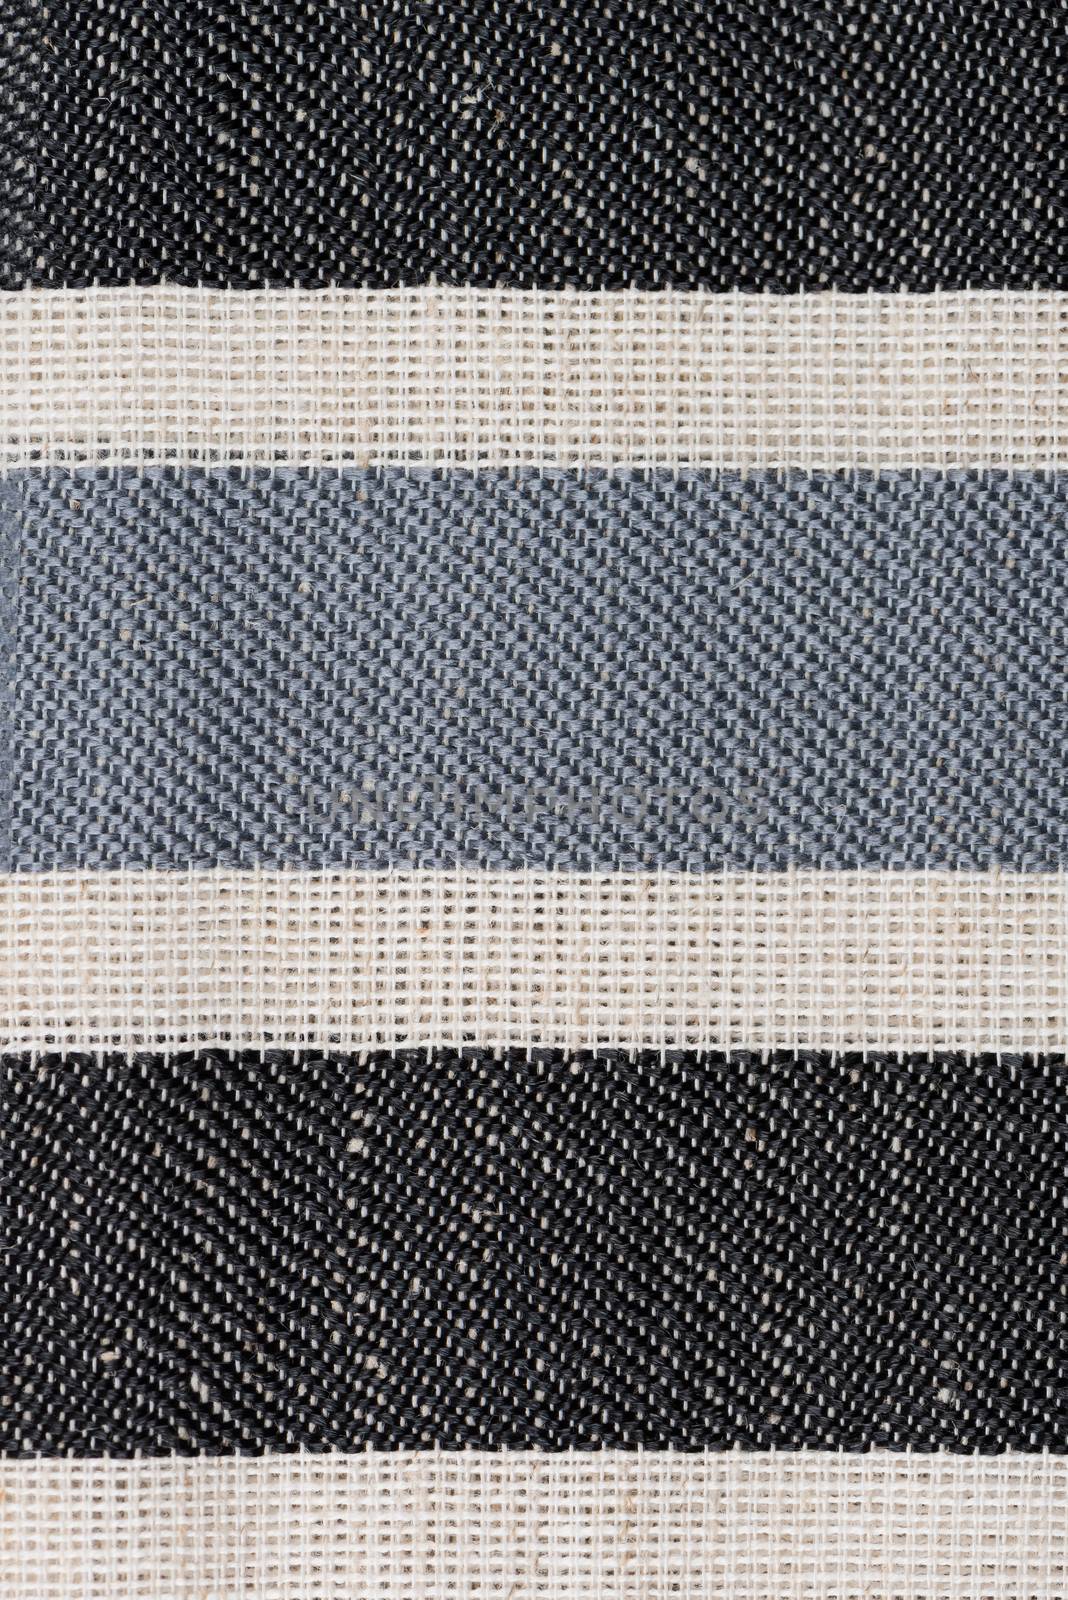 Closeup detail of grey fabric texture background.